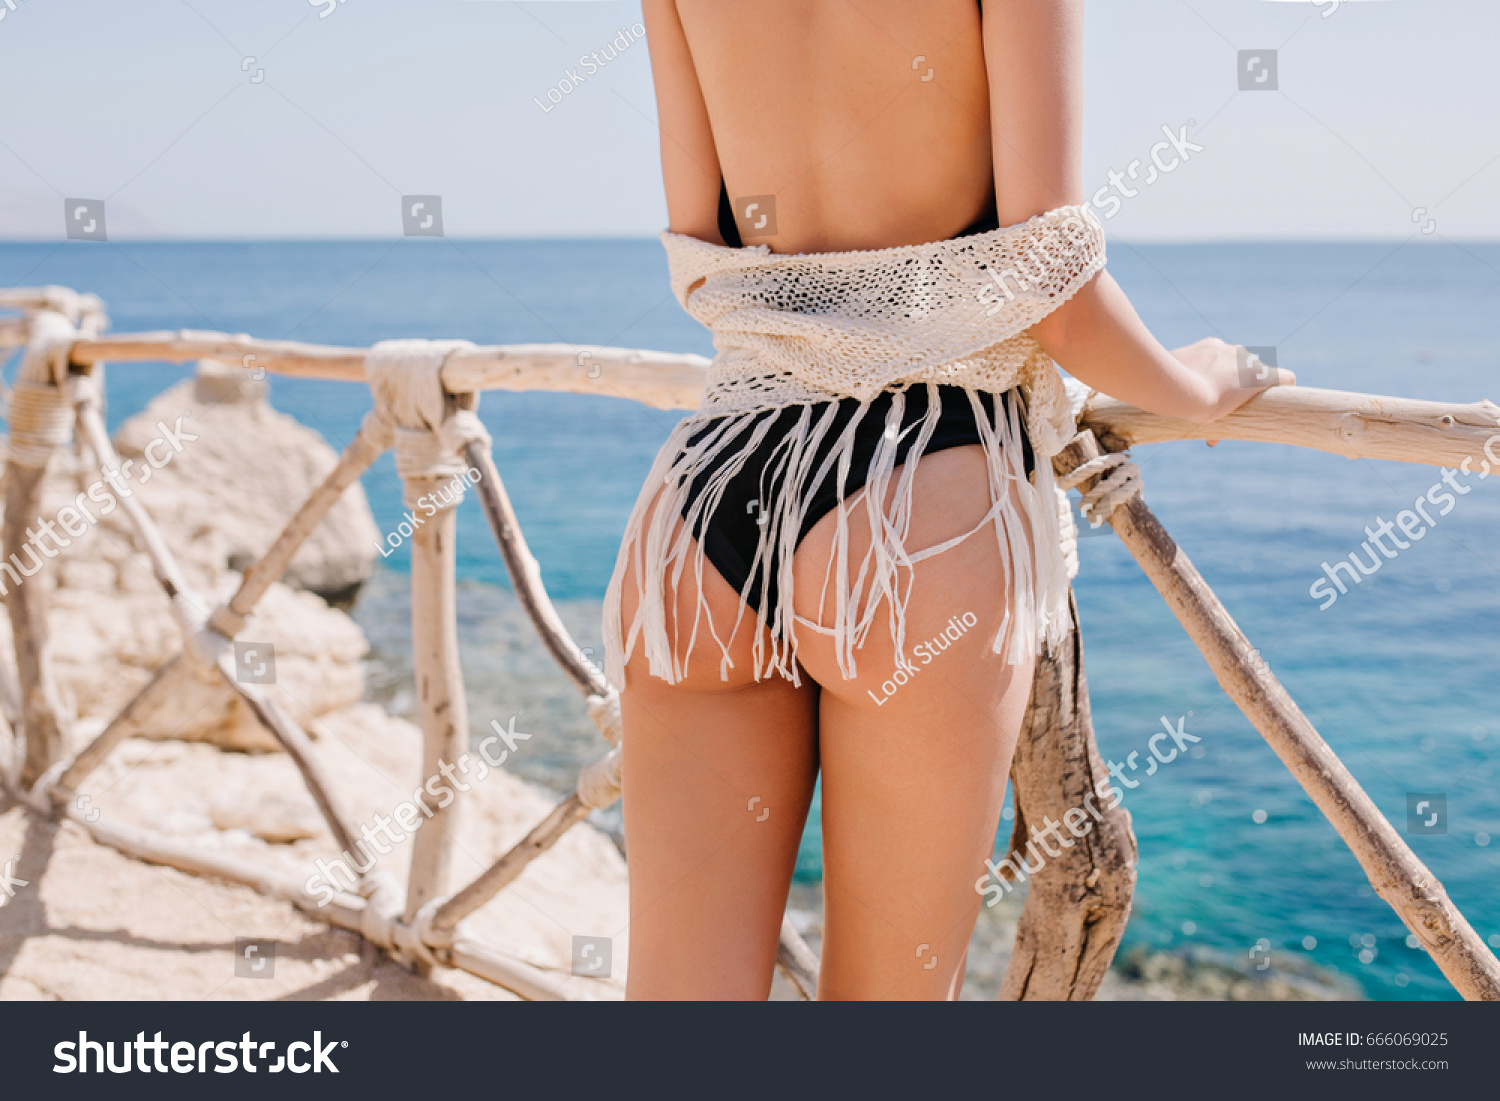 Gorgeous tanned lady in black swimwear standing near the wooden fence and looking at the ocean. Adorable young woman wearing trendy white knitted enjoying vacation at sea resort #666069025